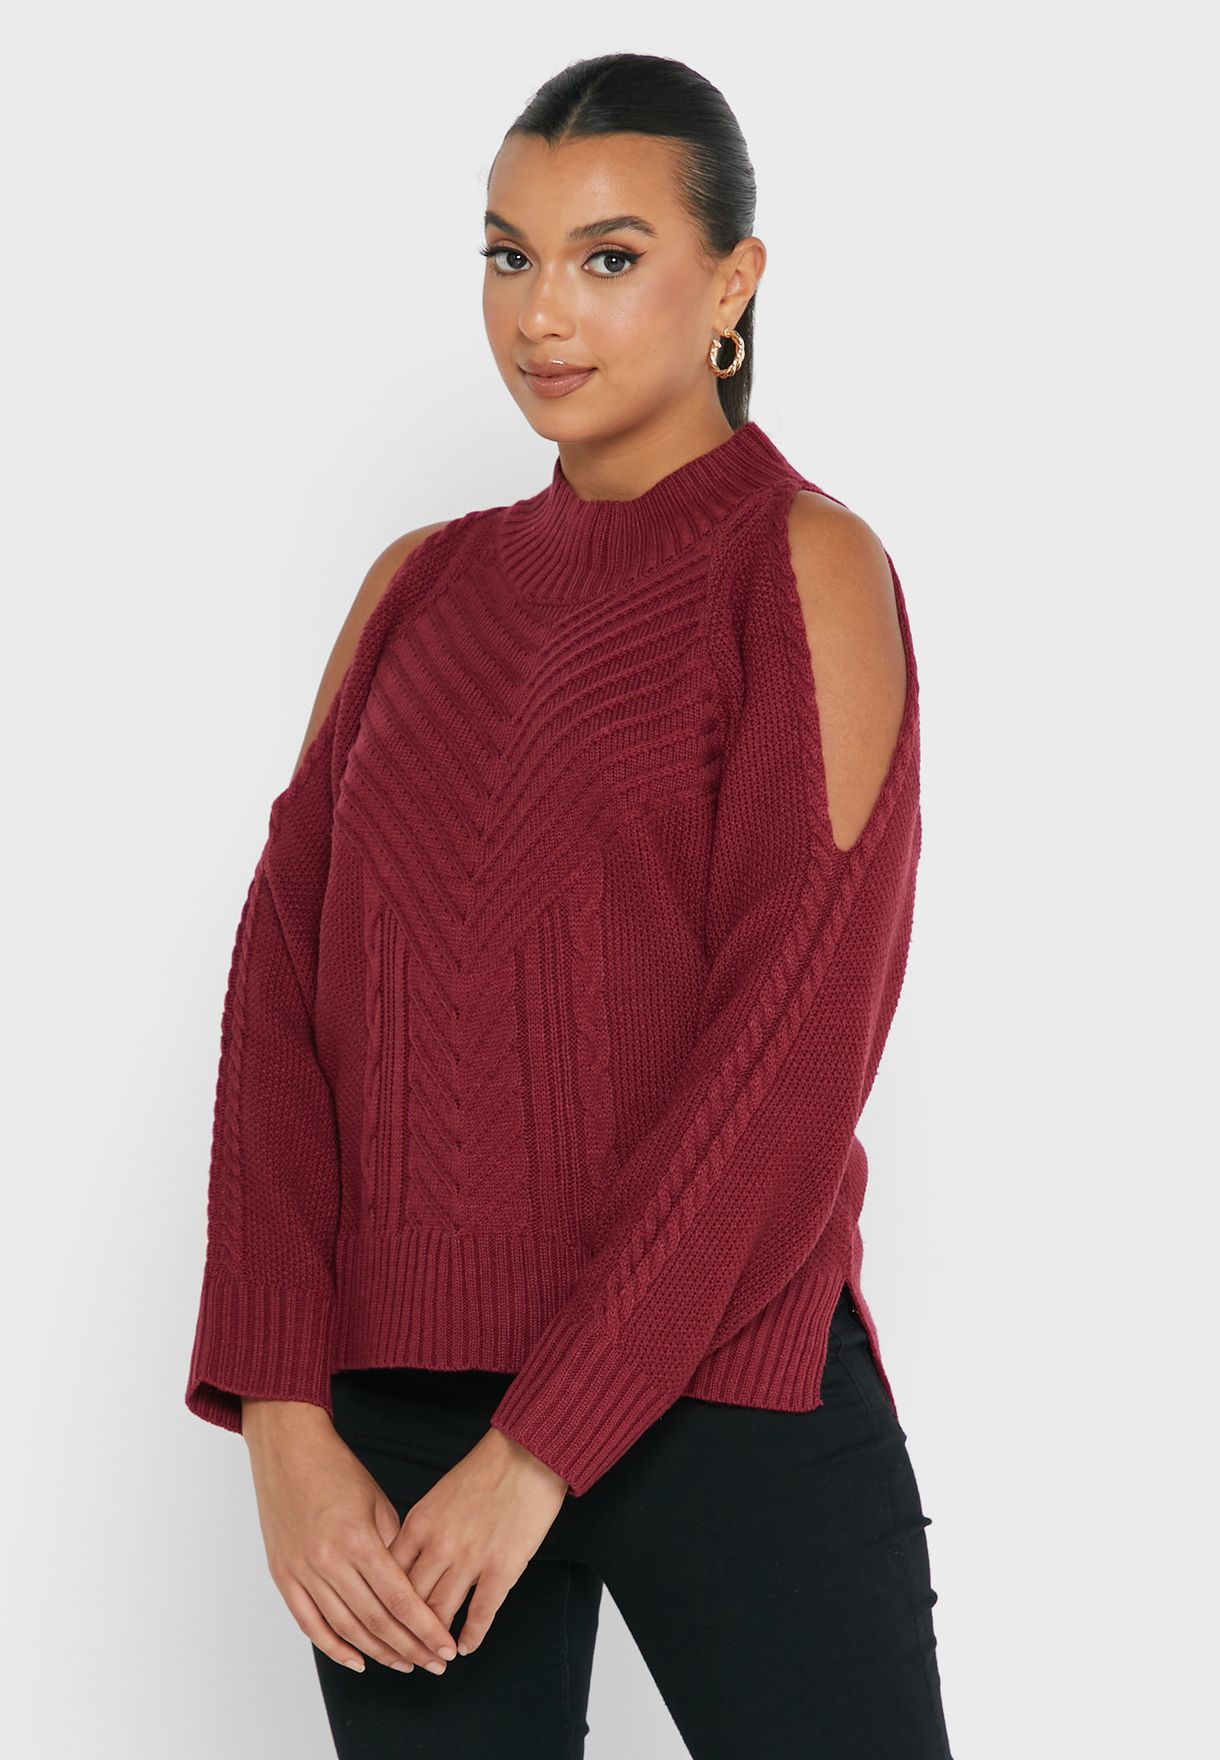 Sweater With Cold Shoulder